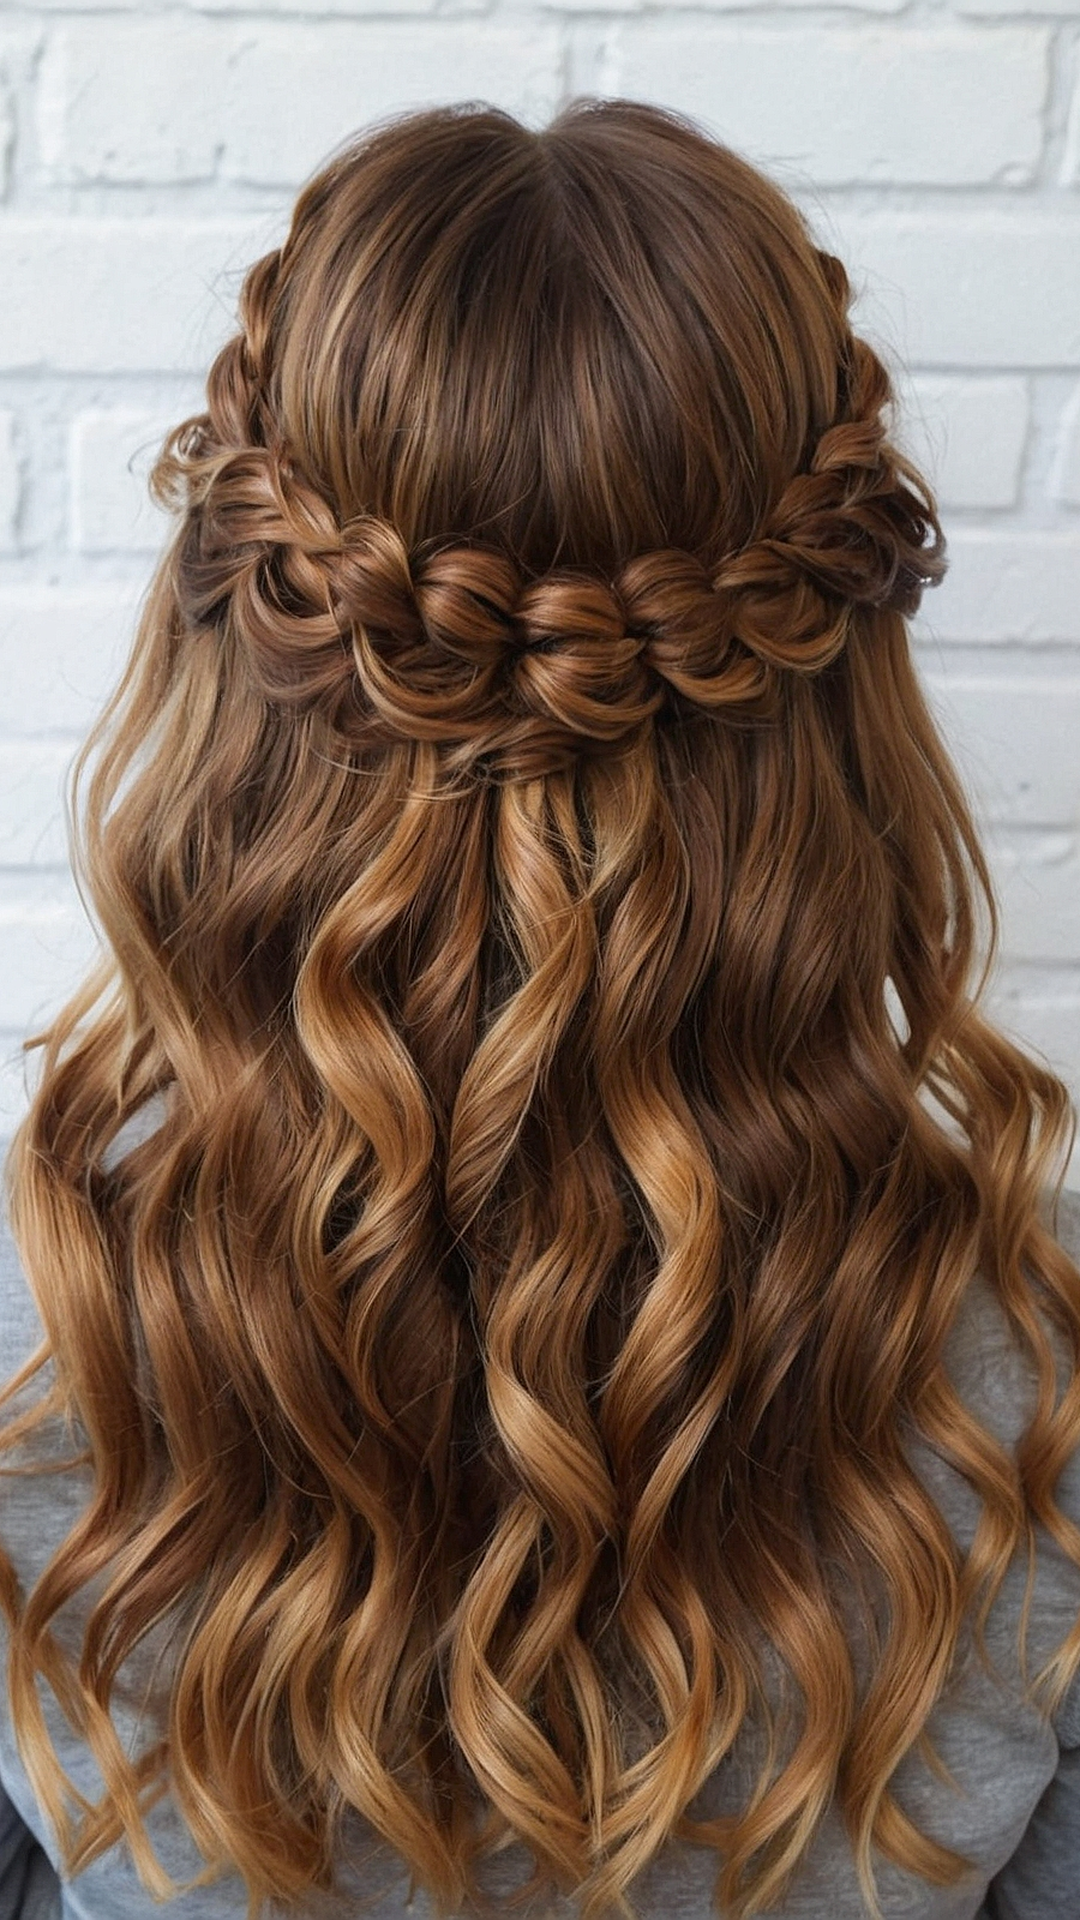 Half-Up Half-Down Styles for a Sweet Prom Appearance